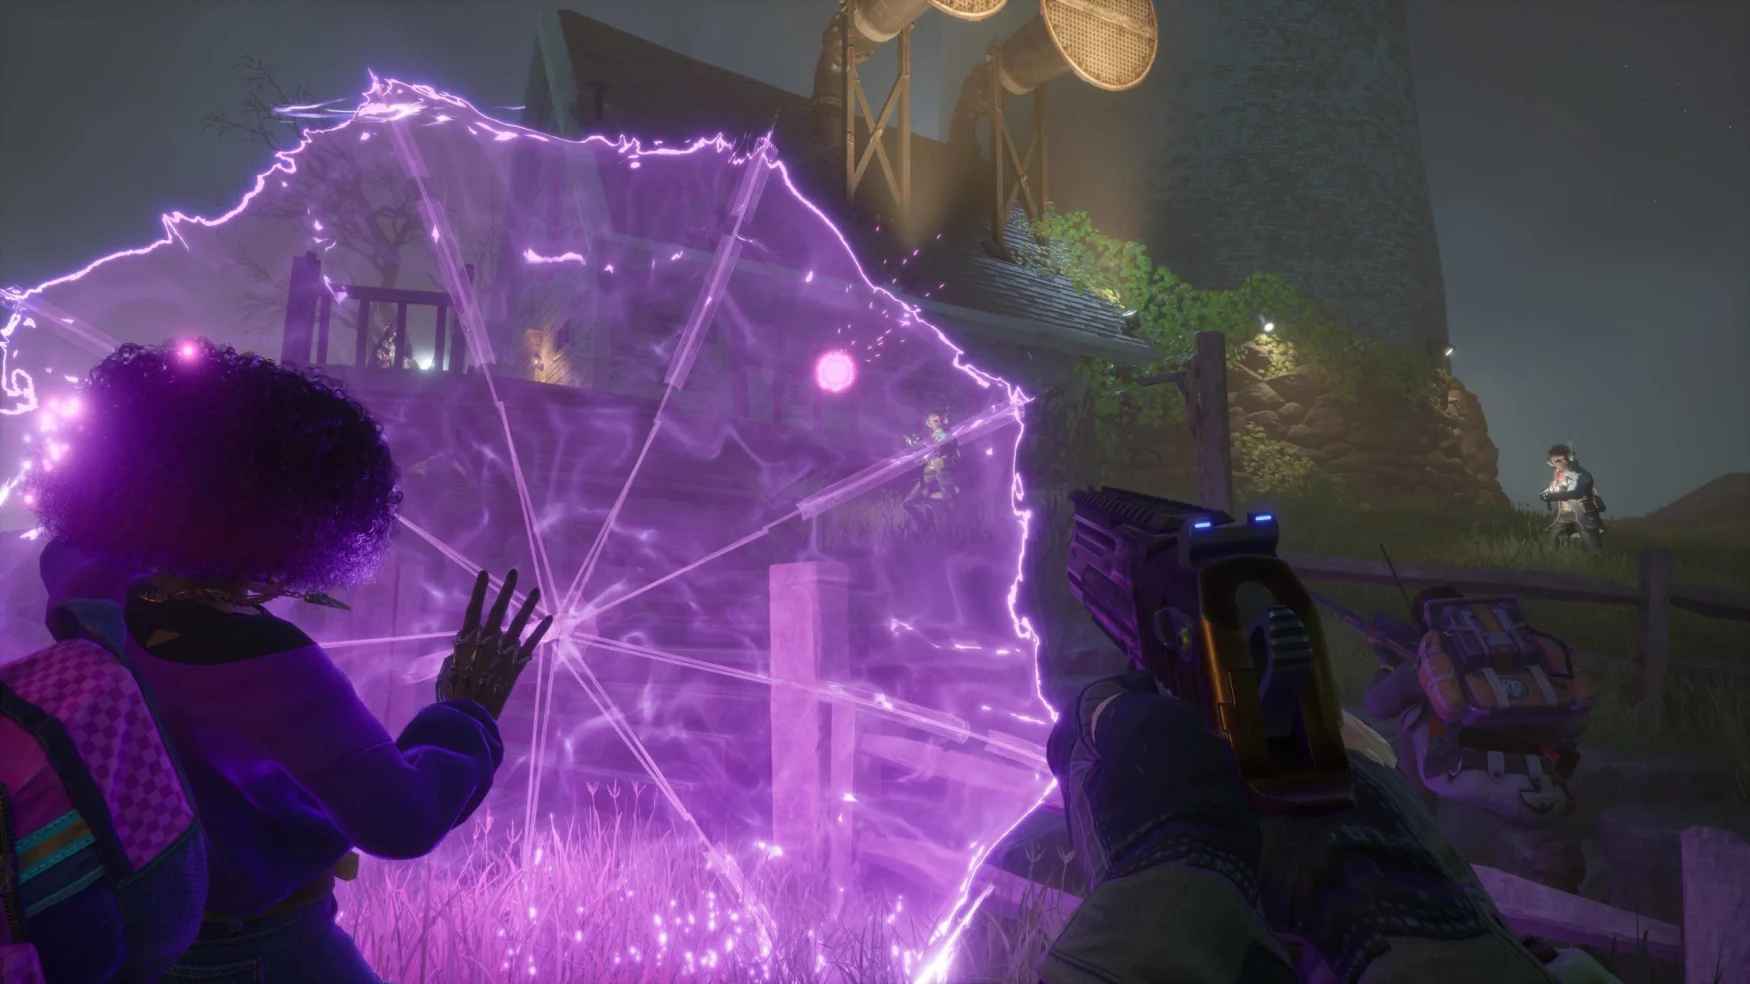 A character with a purple glowing umbrella in the foreground looks on as sentries patrol terrain in the game ‘Redfall.’